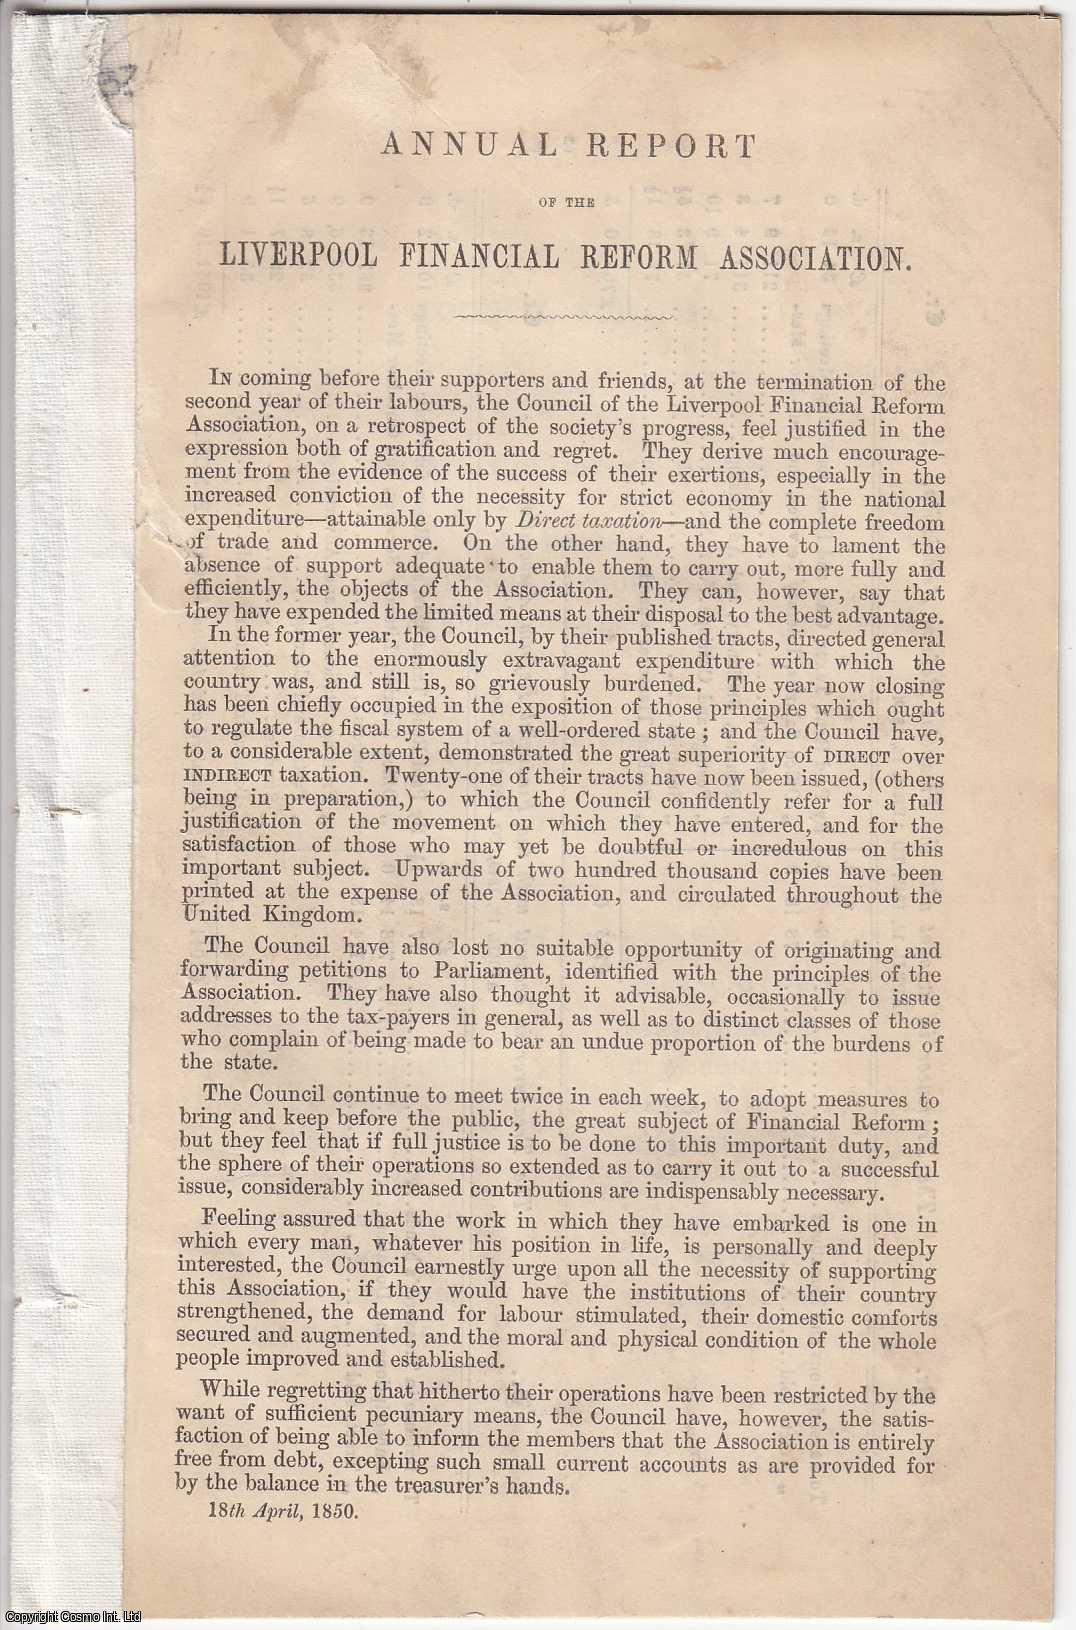 --- - [1850] Annual Report of the Liverpool Financial Reform Association.